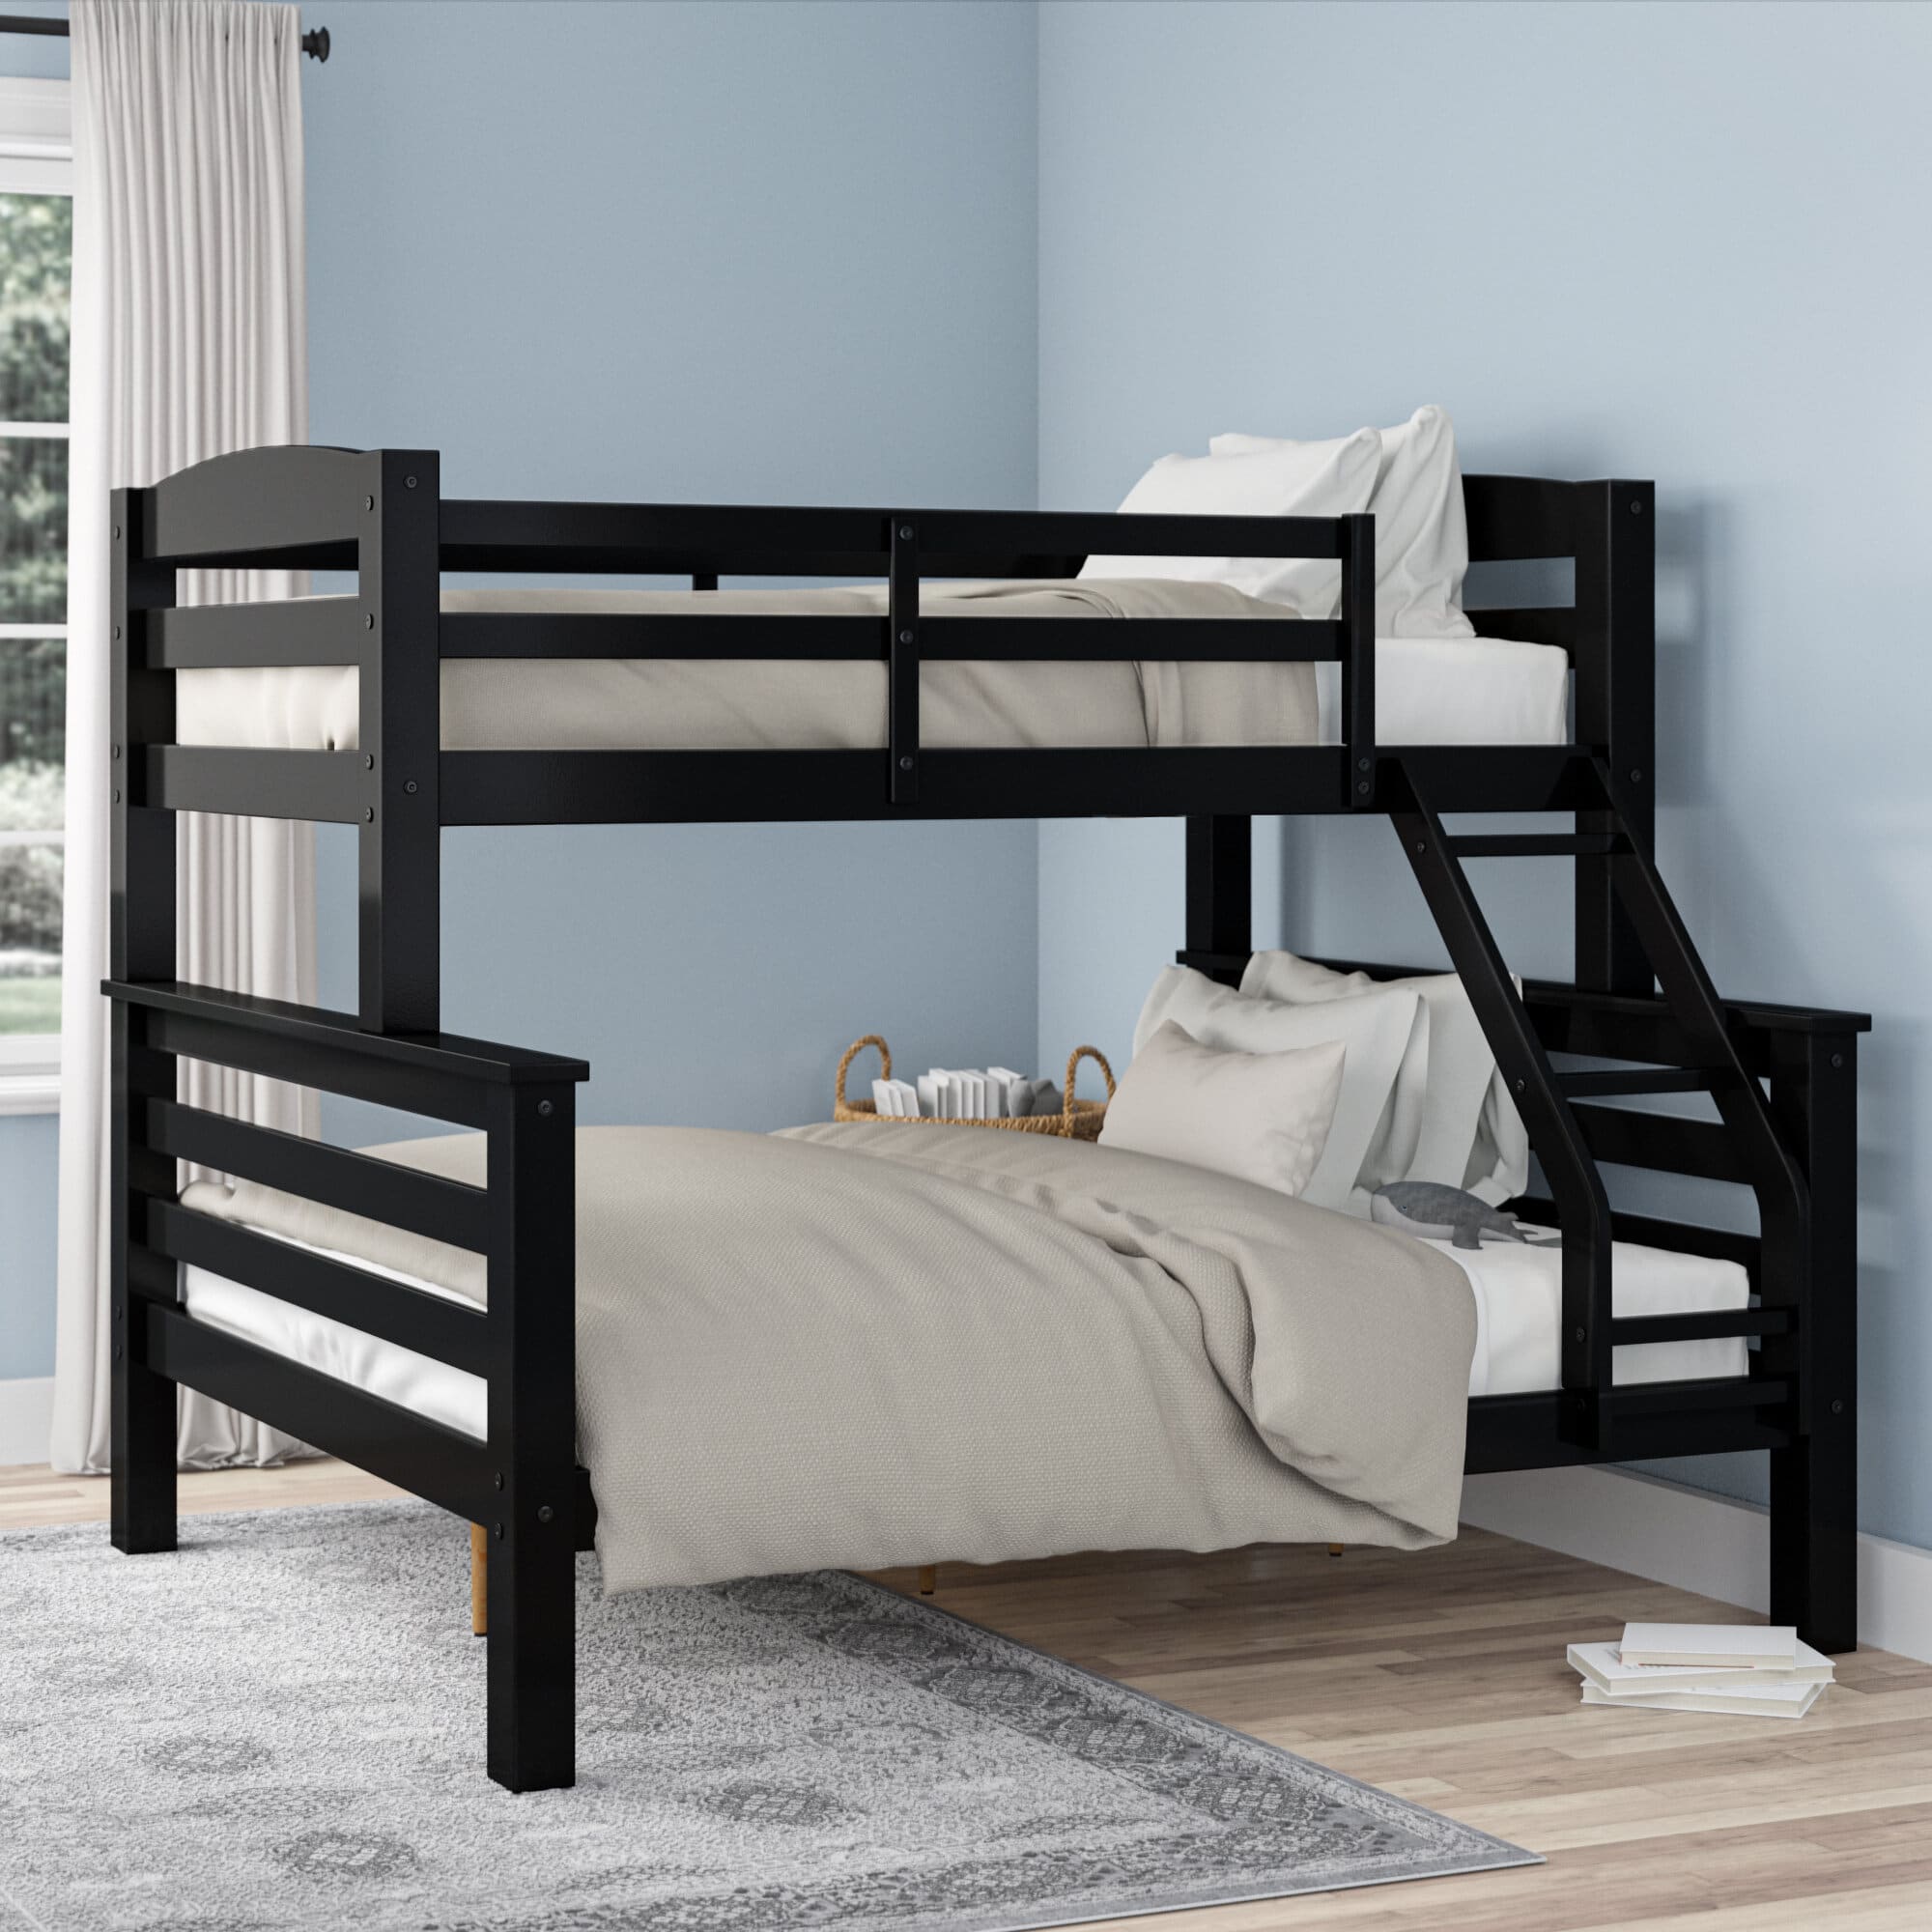 6 Best Twin Over Full Bunk Beds May, Bunk Beds Full Size Top And Bottom